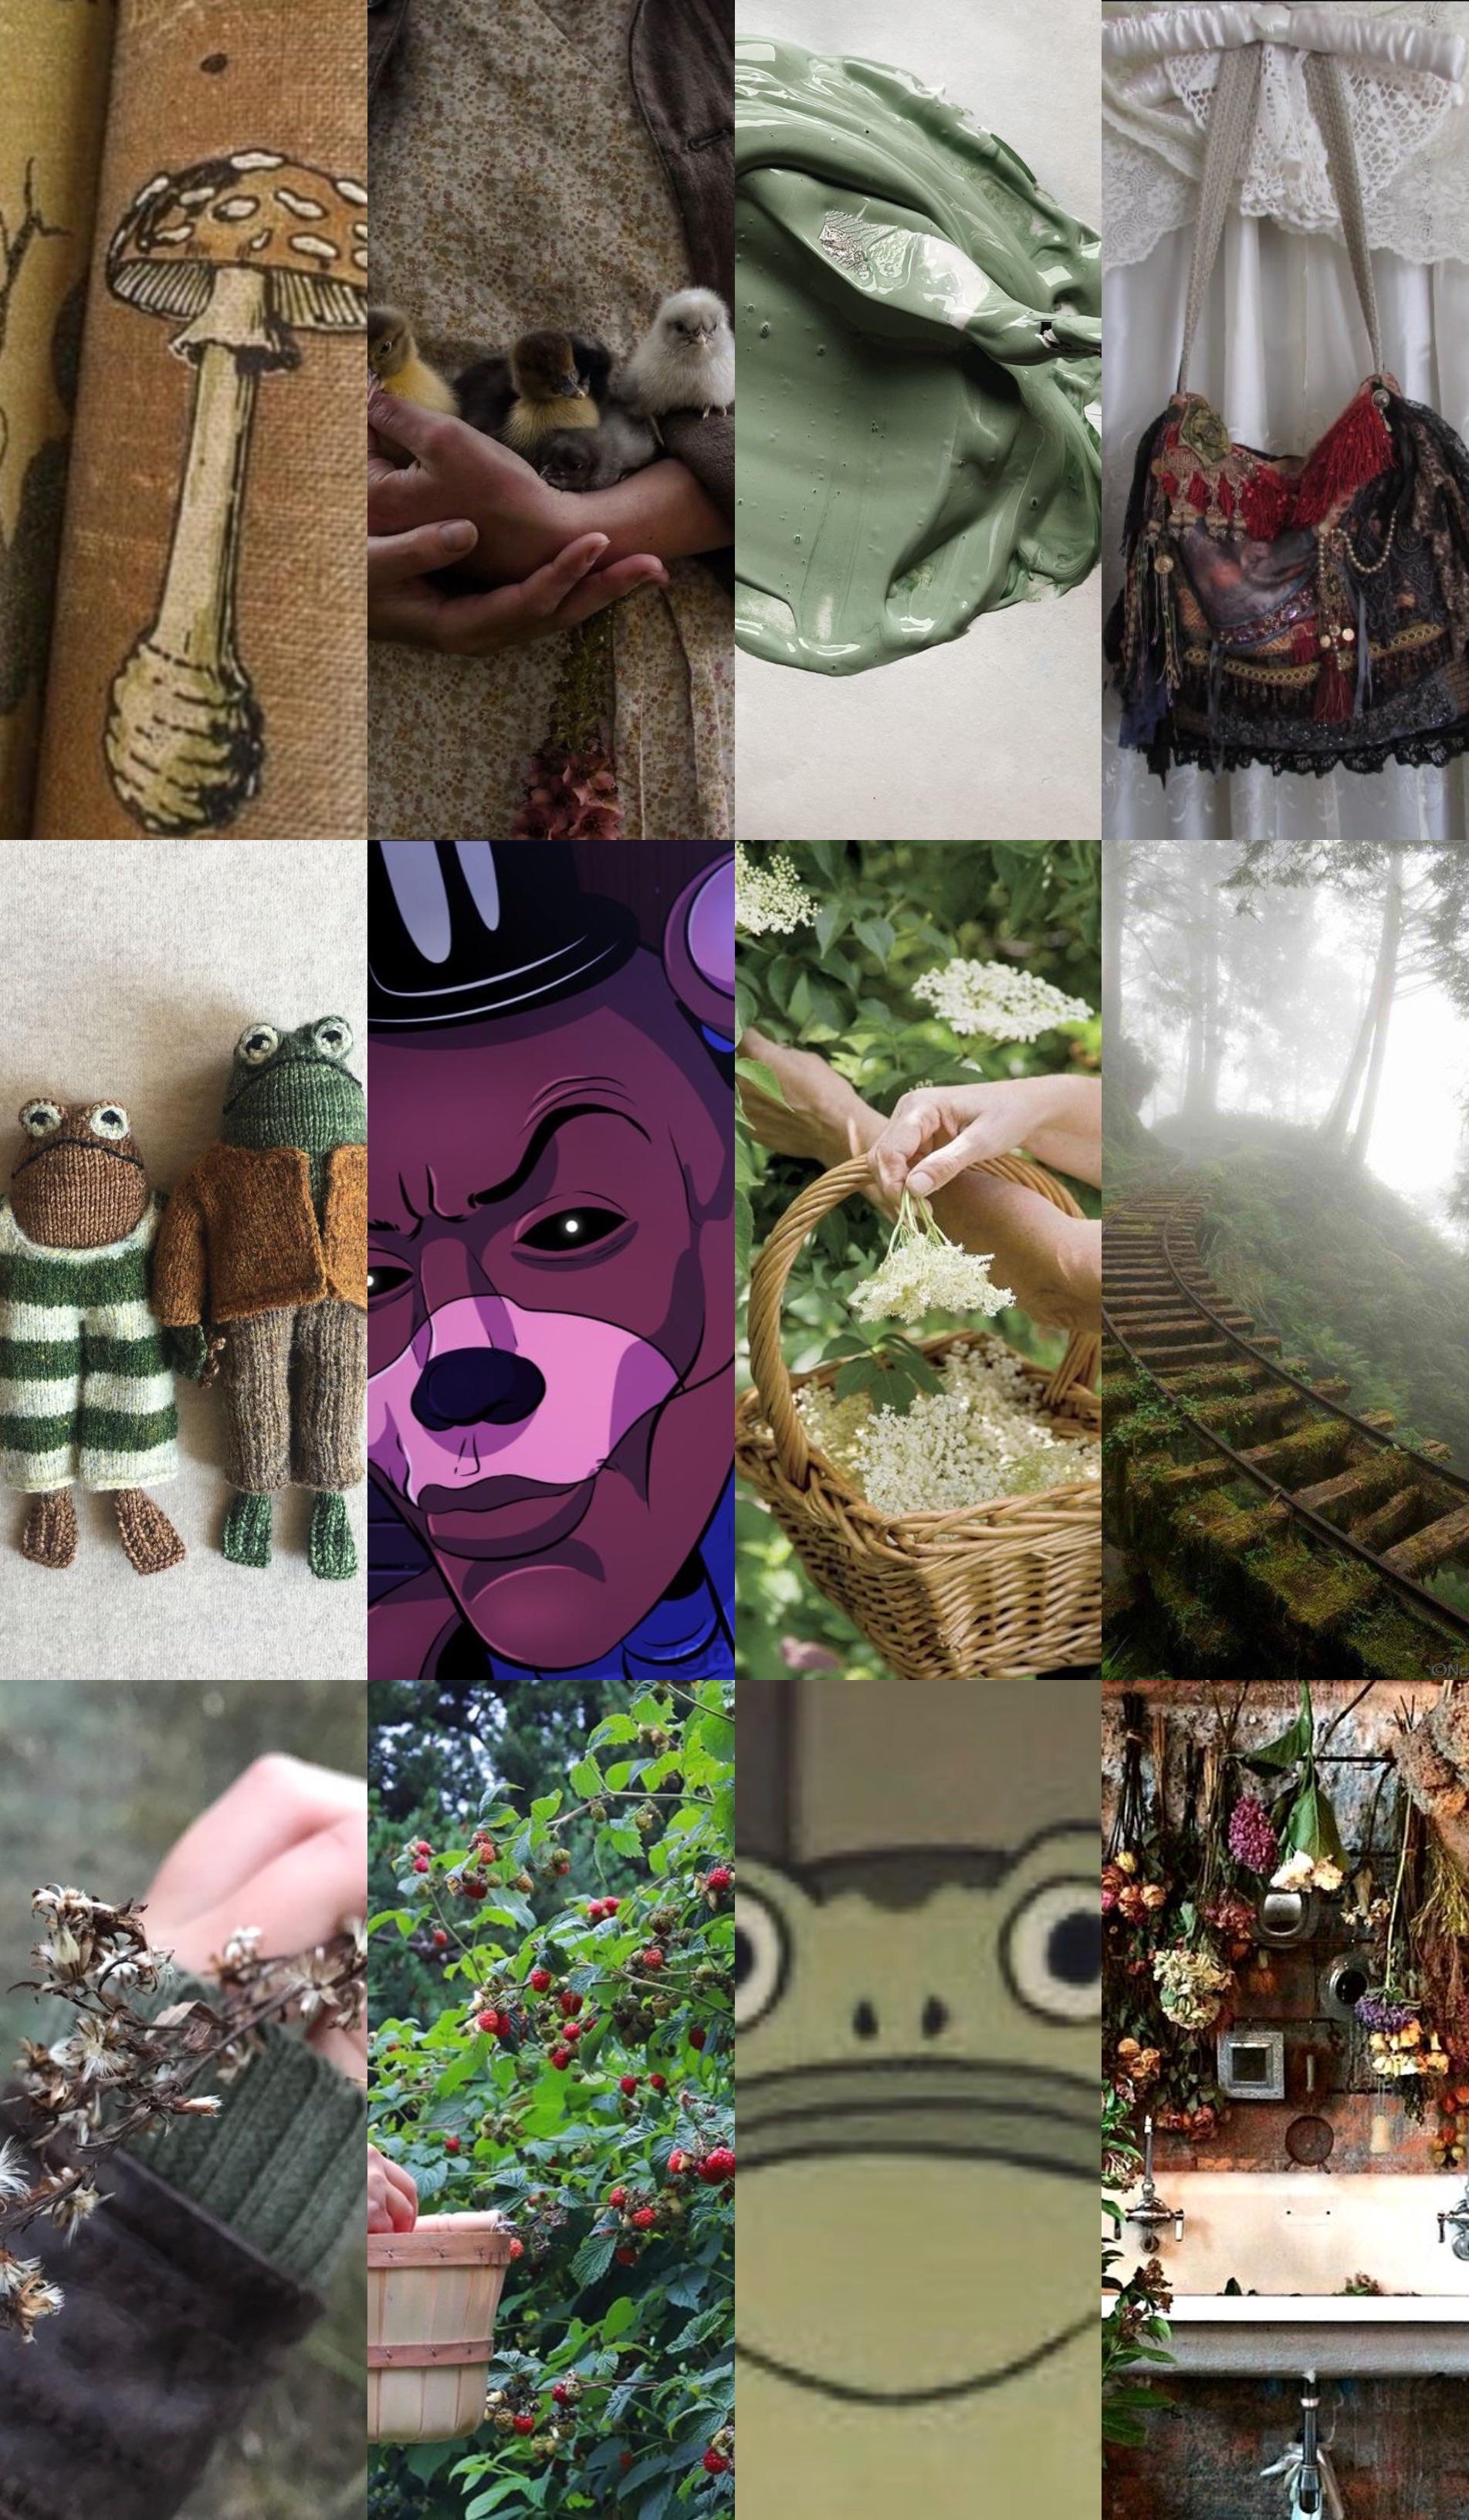 A collage of mushrooms, animals, and people. - Goblincore